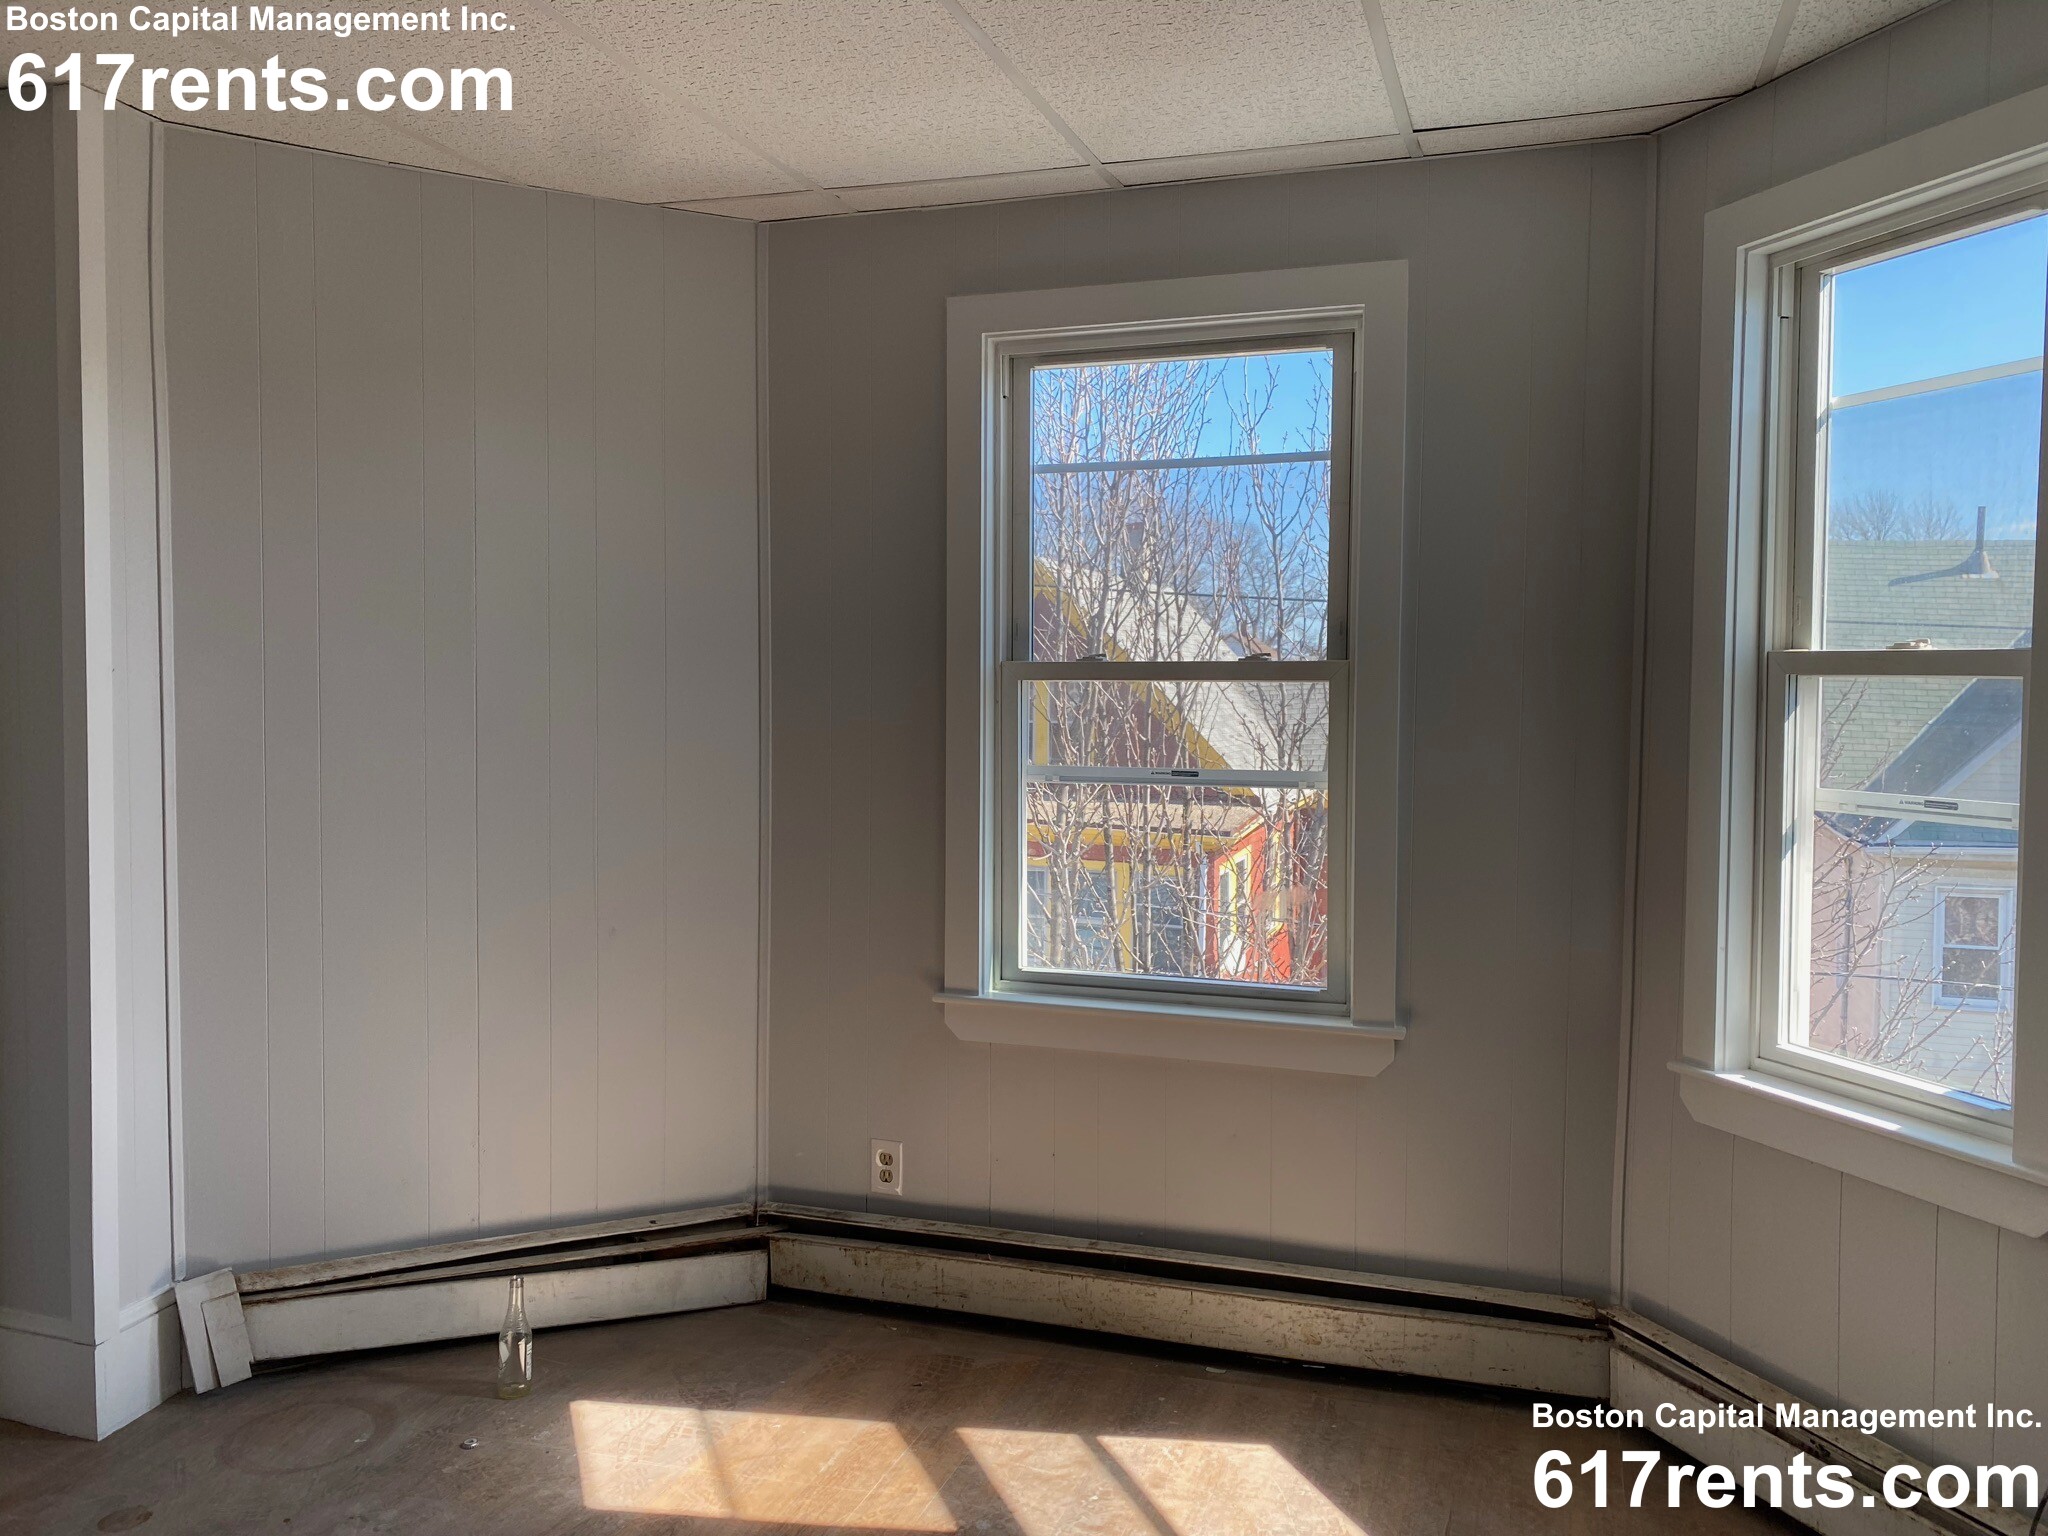 Photos of apartment on Irving St.,Everett MA 02149